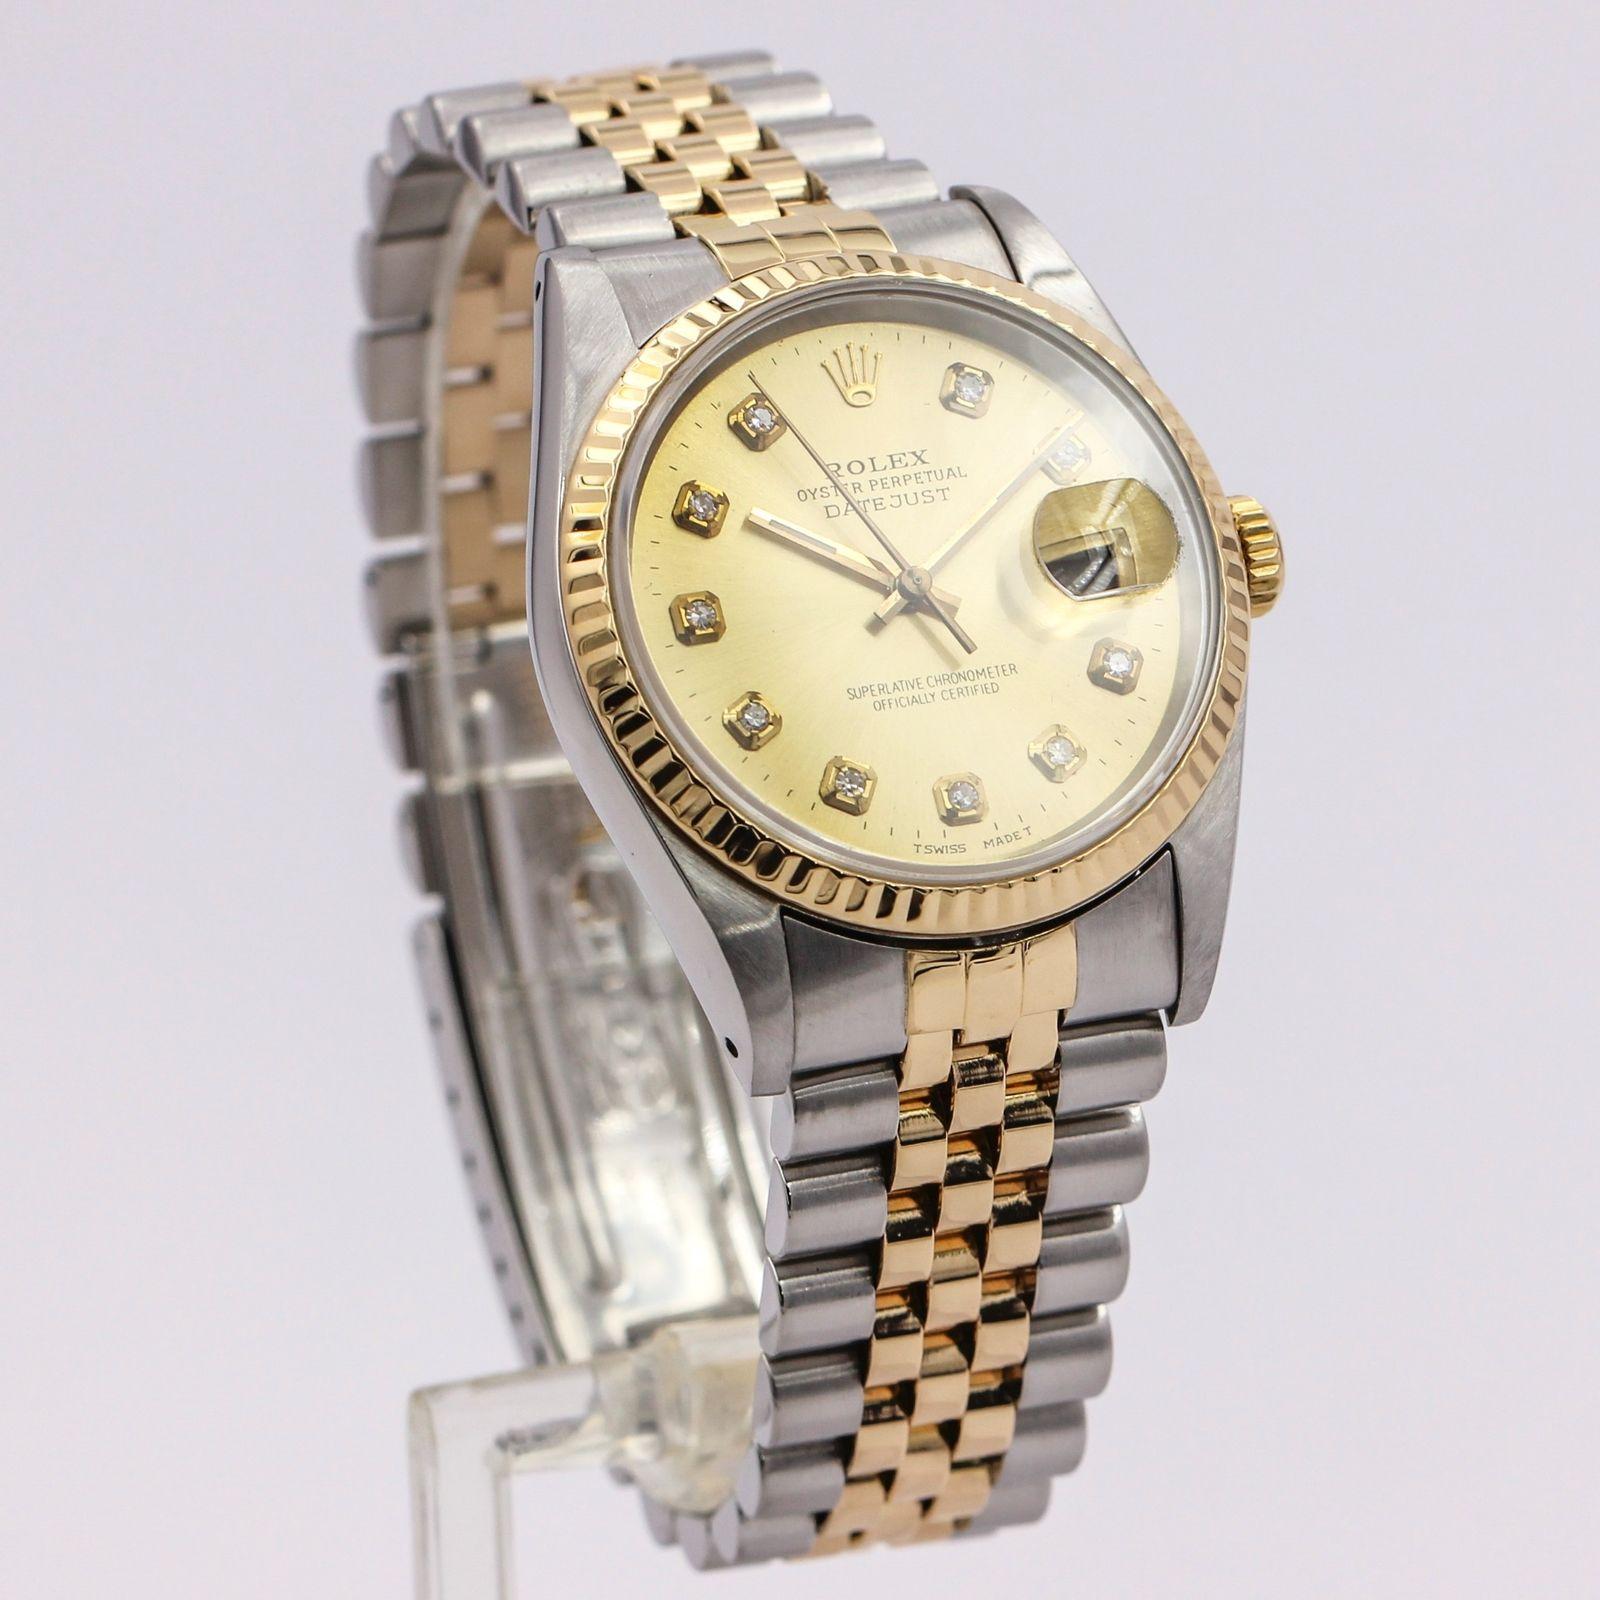 Rolex Datejust 16233 Stainless Steel and 18 Karat Yellow Gold Wristwatch In Excellent Condition For Sale In Fort Lauderdale, FL